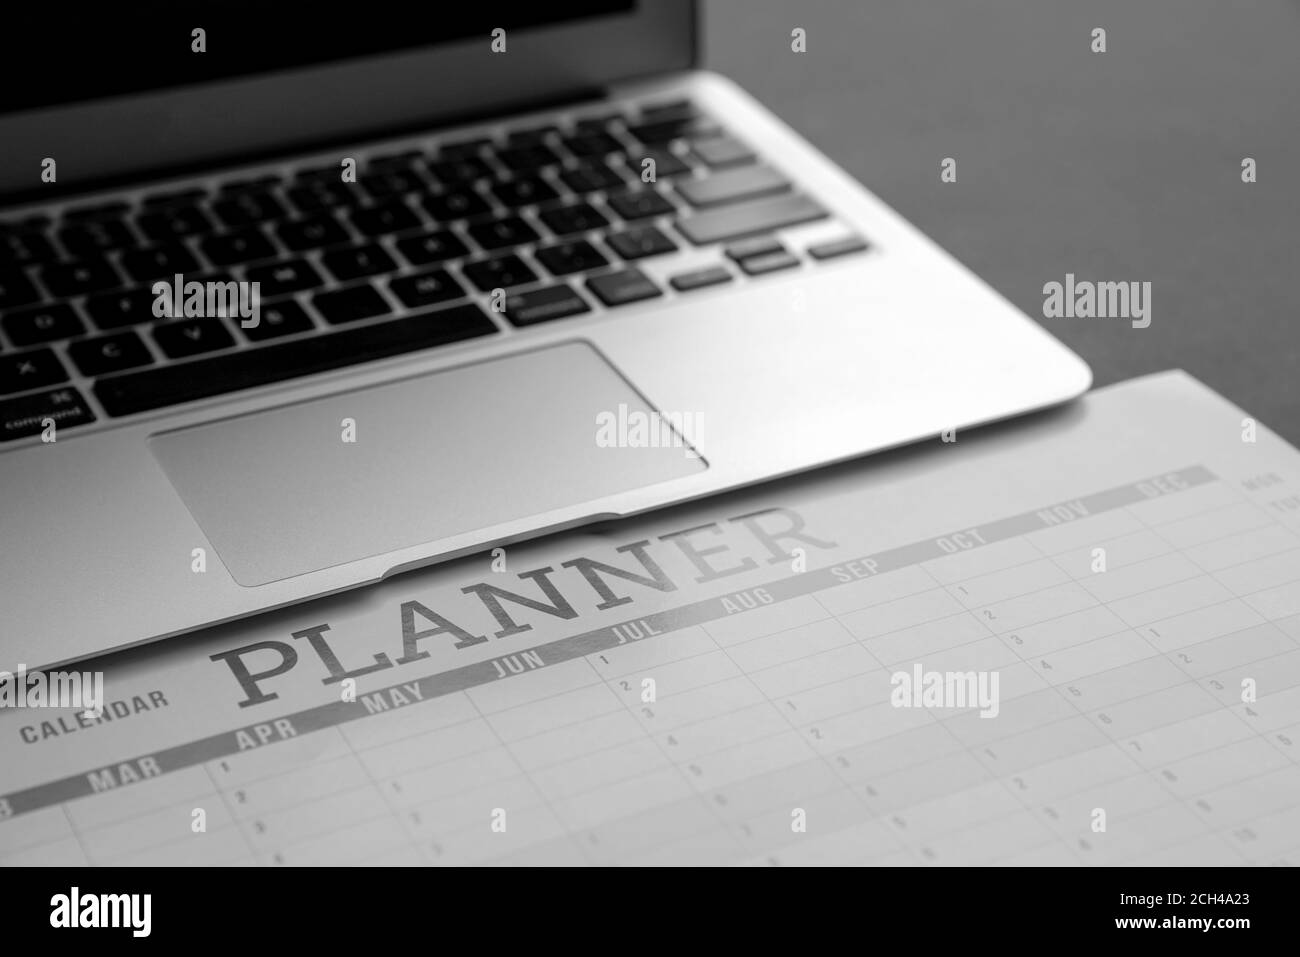 Computer laptop on top of calendar planner. Soft focus, Business planning concept. Stock Photo